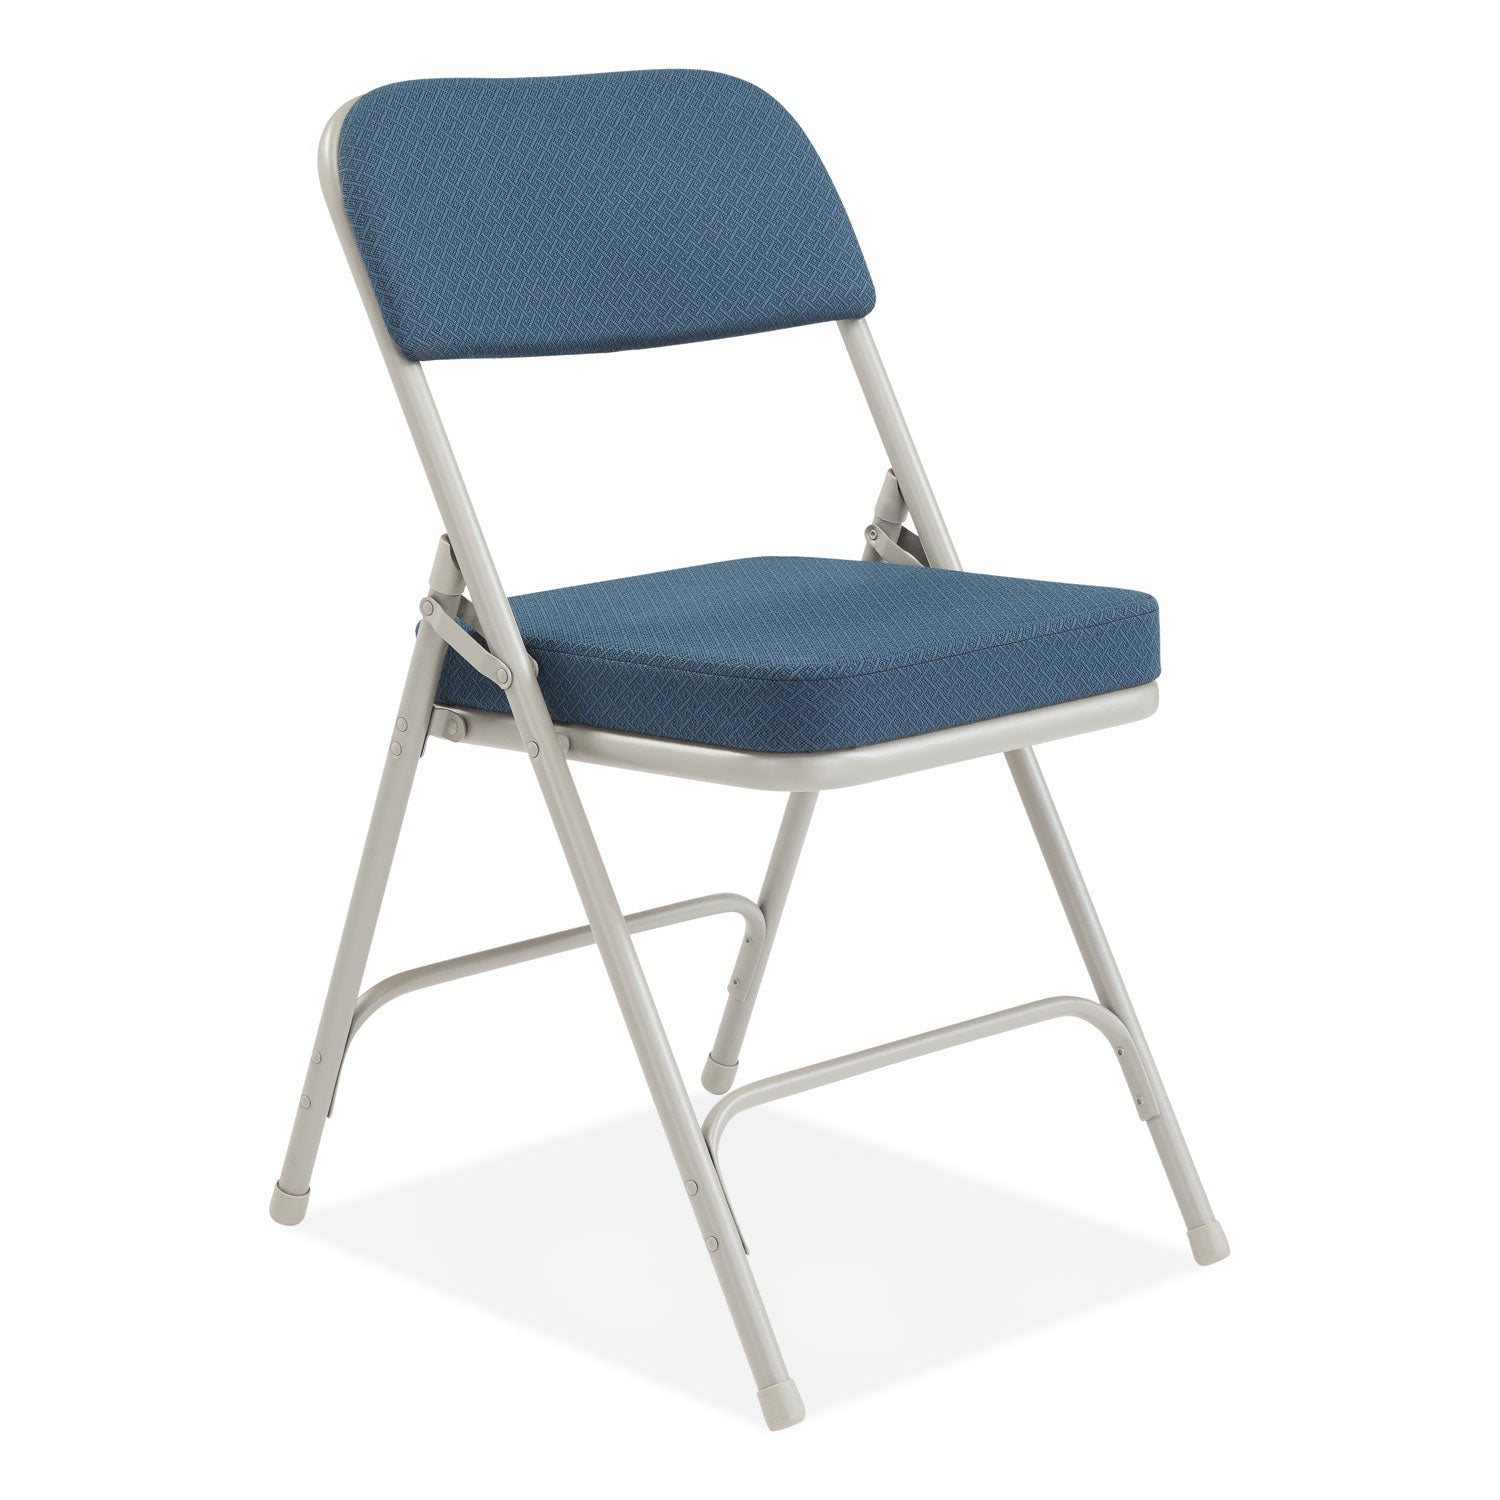 3200-series-fabric-dual-hinge-folding-chair-supports-300-lb-regal-blue-seat-back-gray-base-2-ct-ships-in-1-3-bus-days_nps3215 - 2